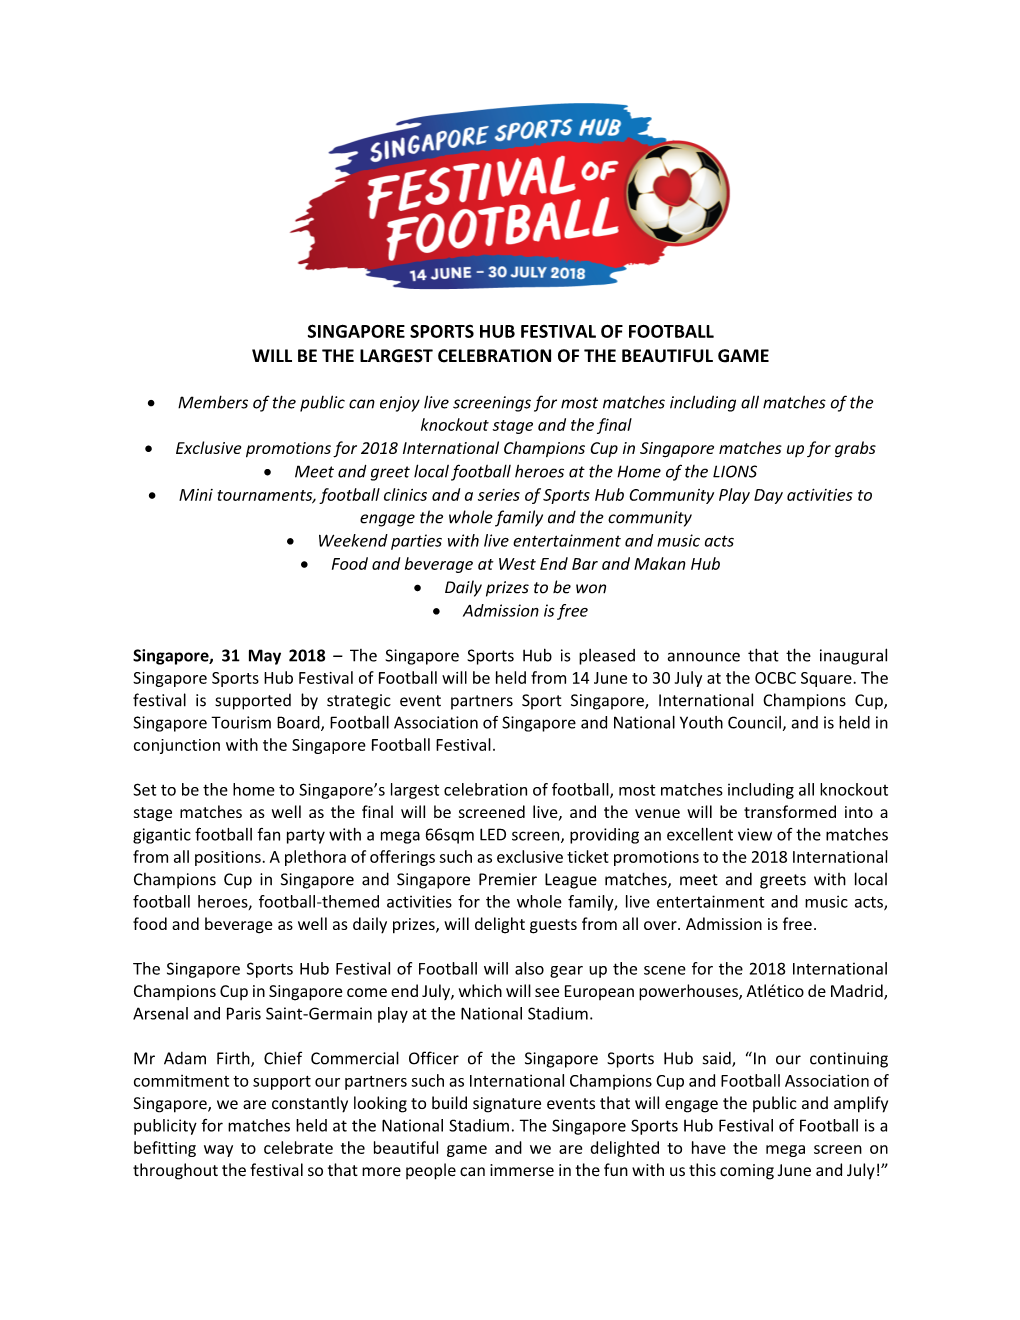 Singapore Sports Hub Festival of Football Will Be the Largest Celebration of the Beautiful Game